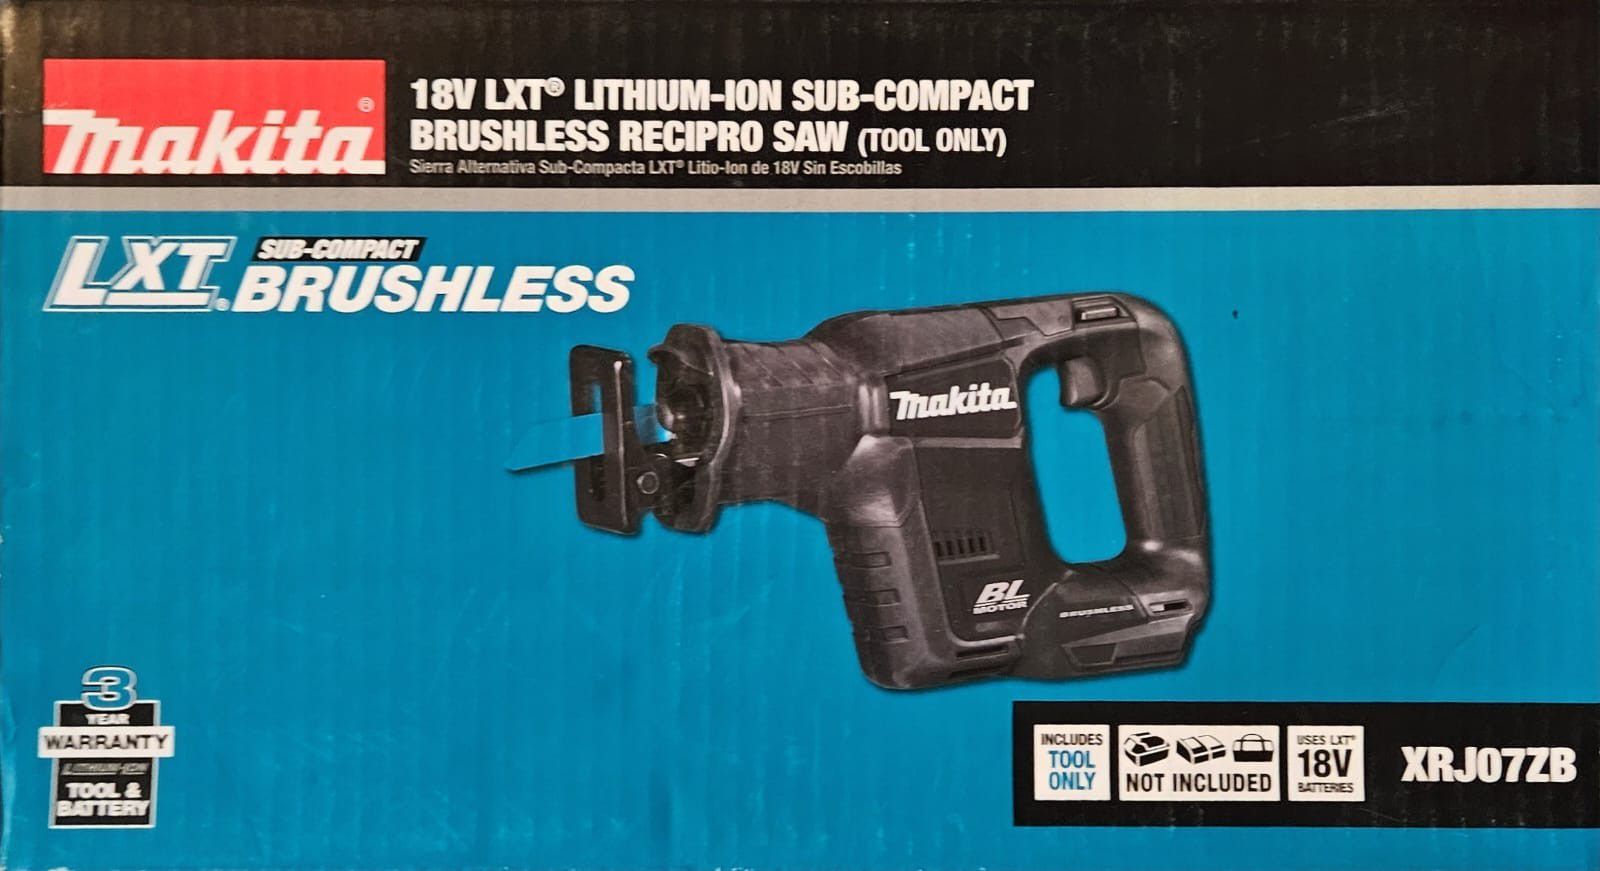 Makita 18V LXT Sub-Compact Lithium-Ion Brushless Cordless Variable Speed Reciprocating Saw (Tool-Only)

